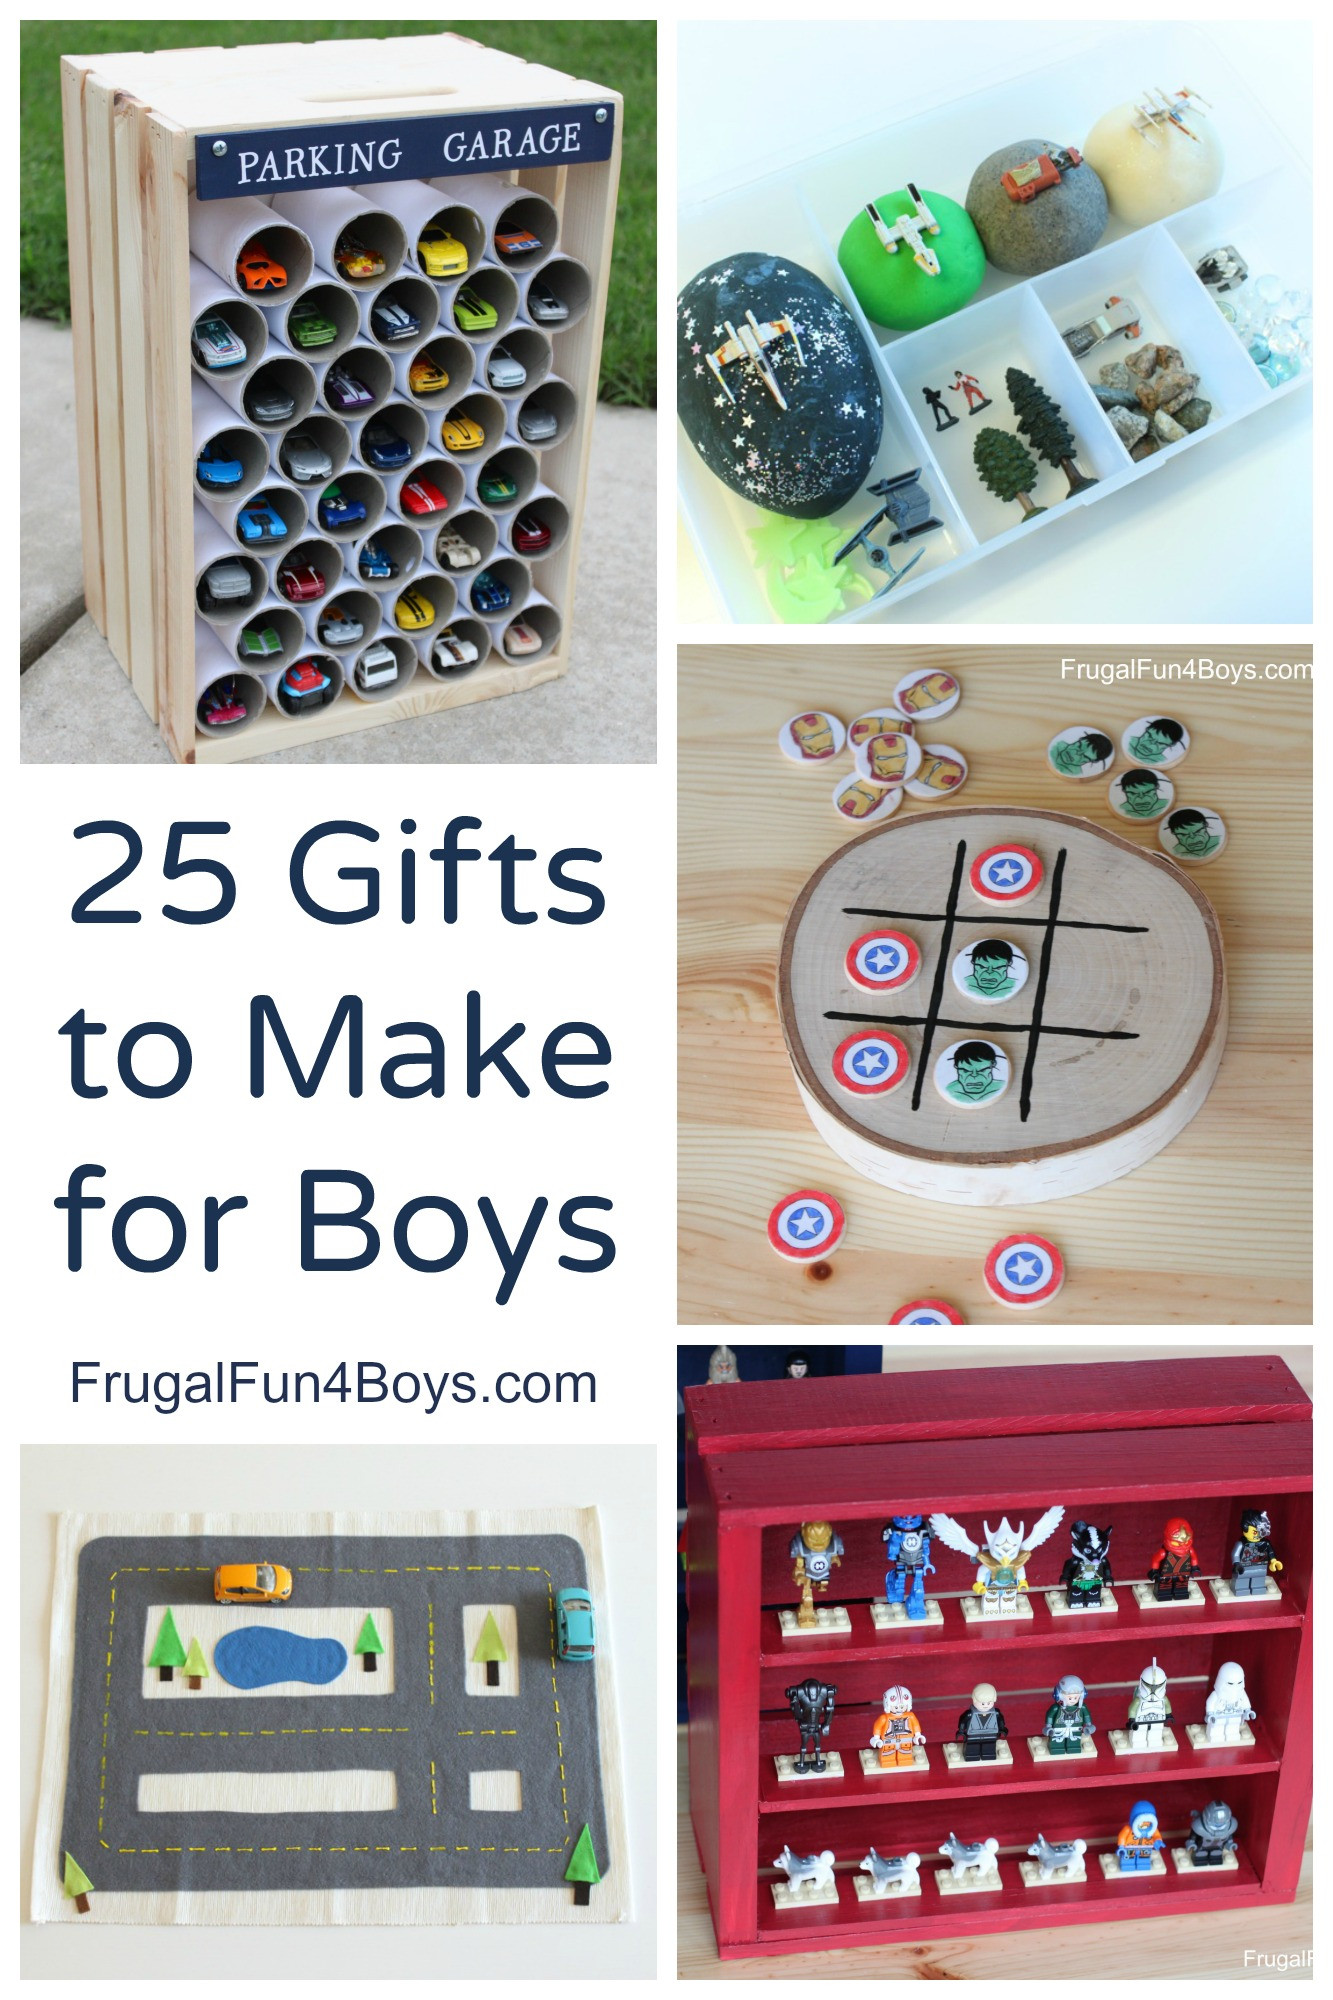 Xmas Gift Ideas For Boys
 25 More Homemade Gifts to Make for Boys Frugal Fun For